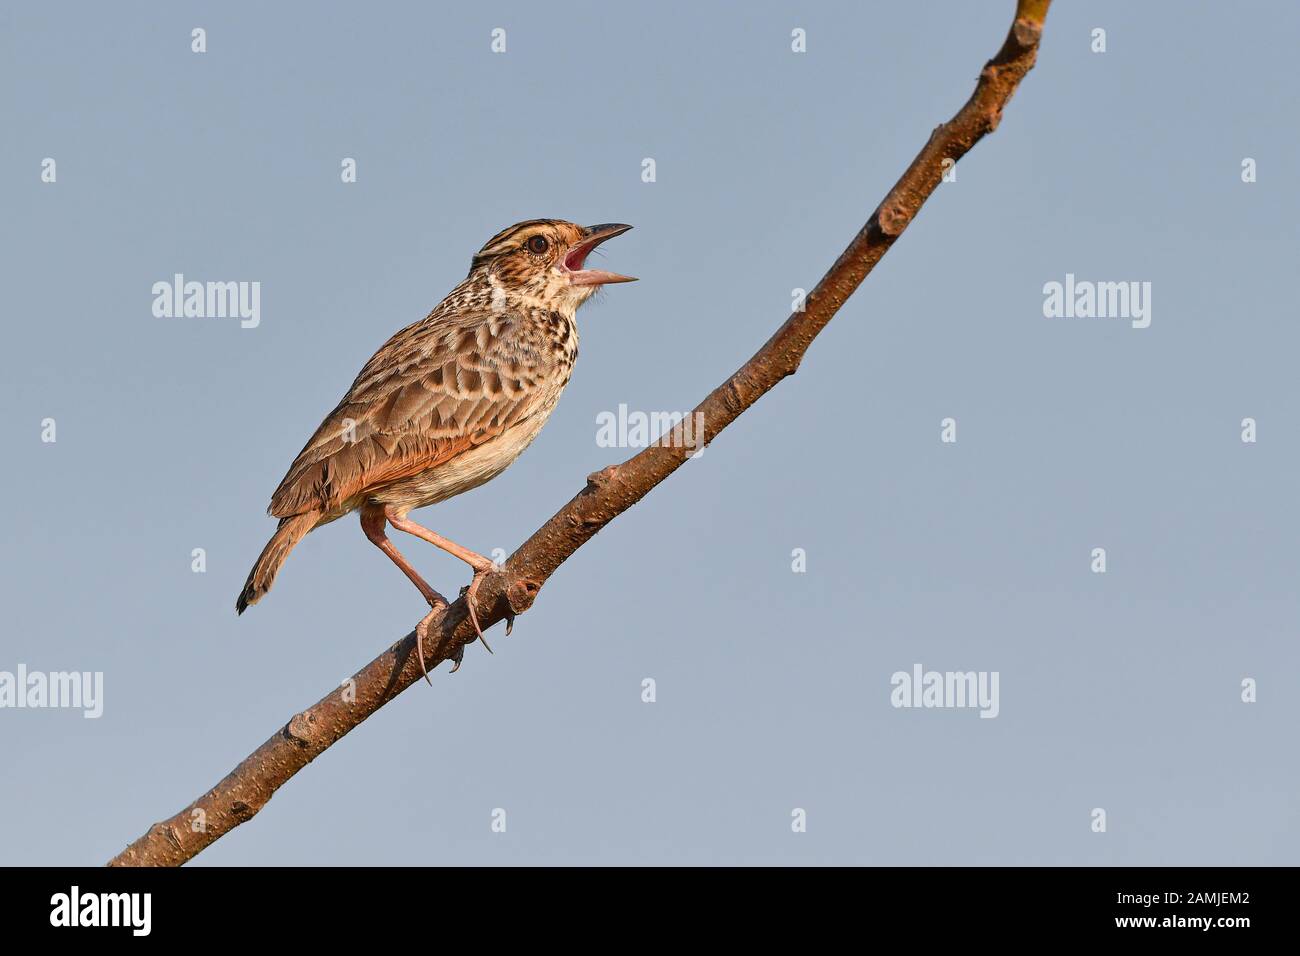 The Indochinese bush lark (Mirafra erythrocephala) or Indochinese lark is a species of lark in the family Alaudidae found in southeast Asia. Stock Photo